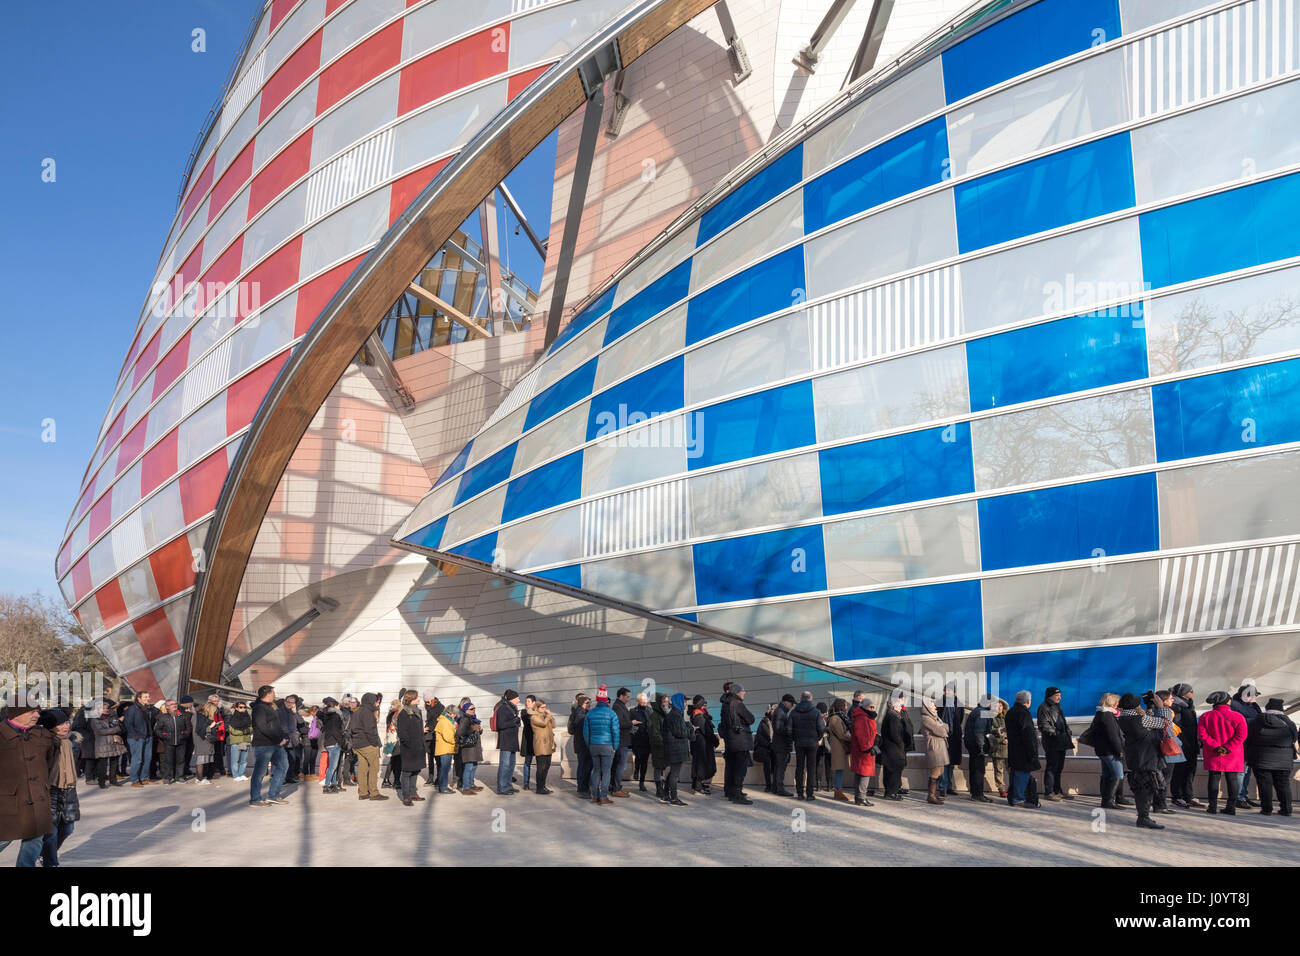 people in line for exhibition, Louis Vuitton Foundation building Stock Photo: 138294706 - Alamy